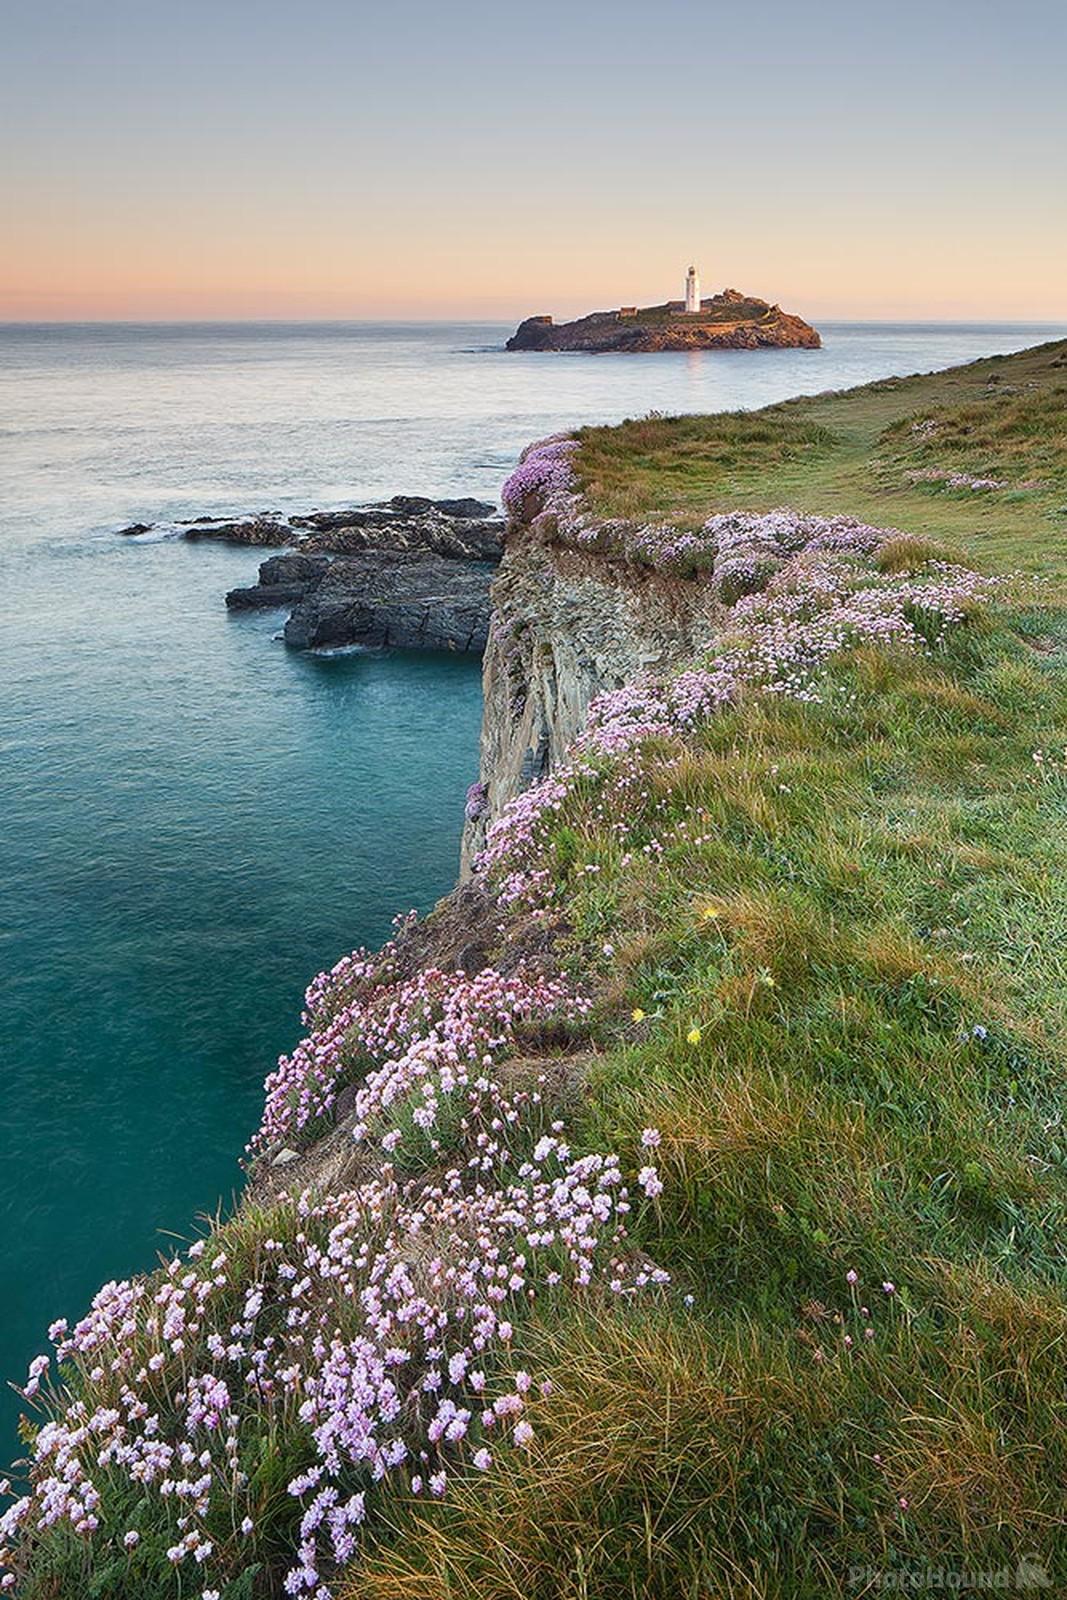 Image of Godrevy Lighthouse by Esen Tunar